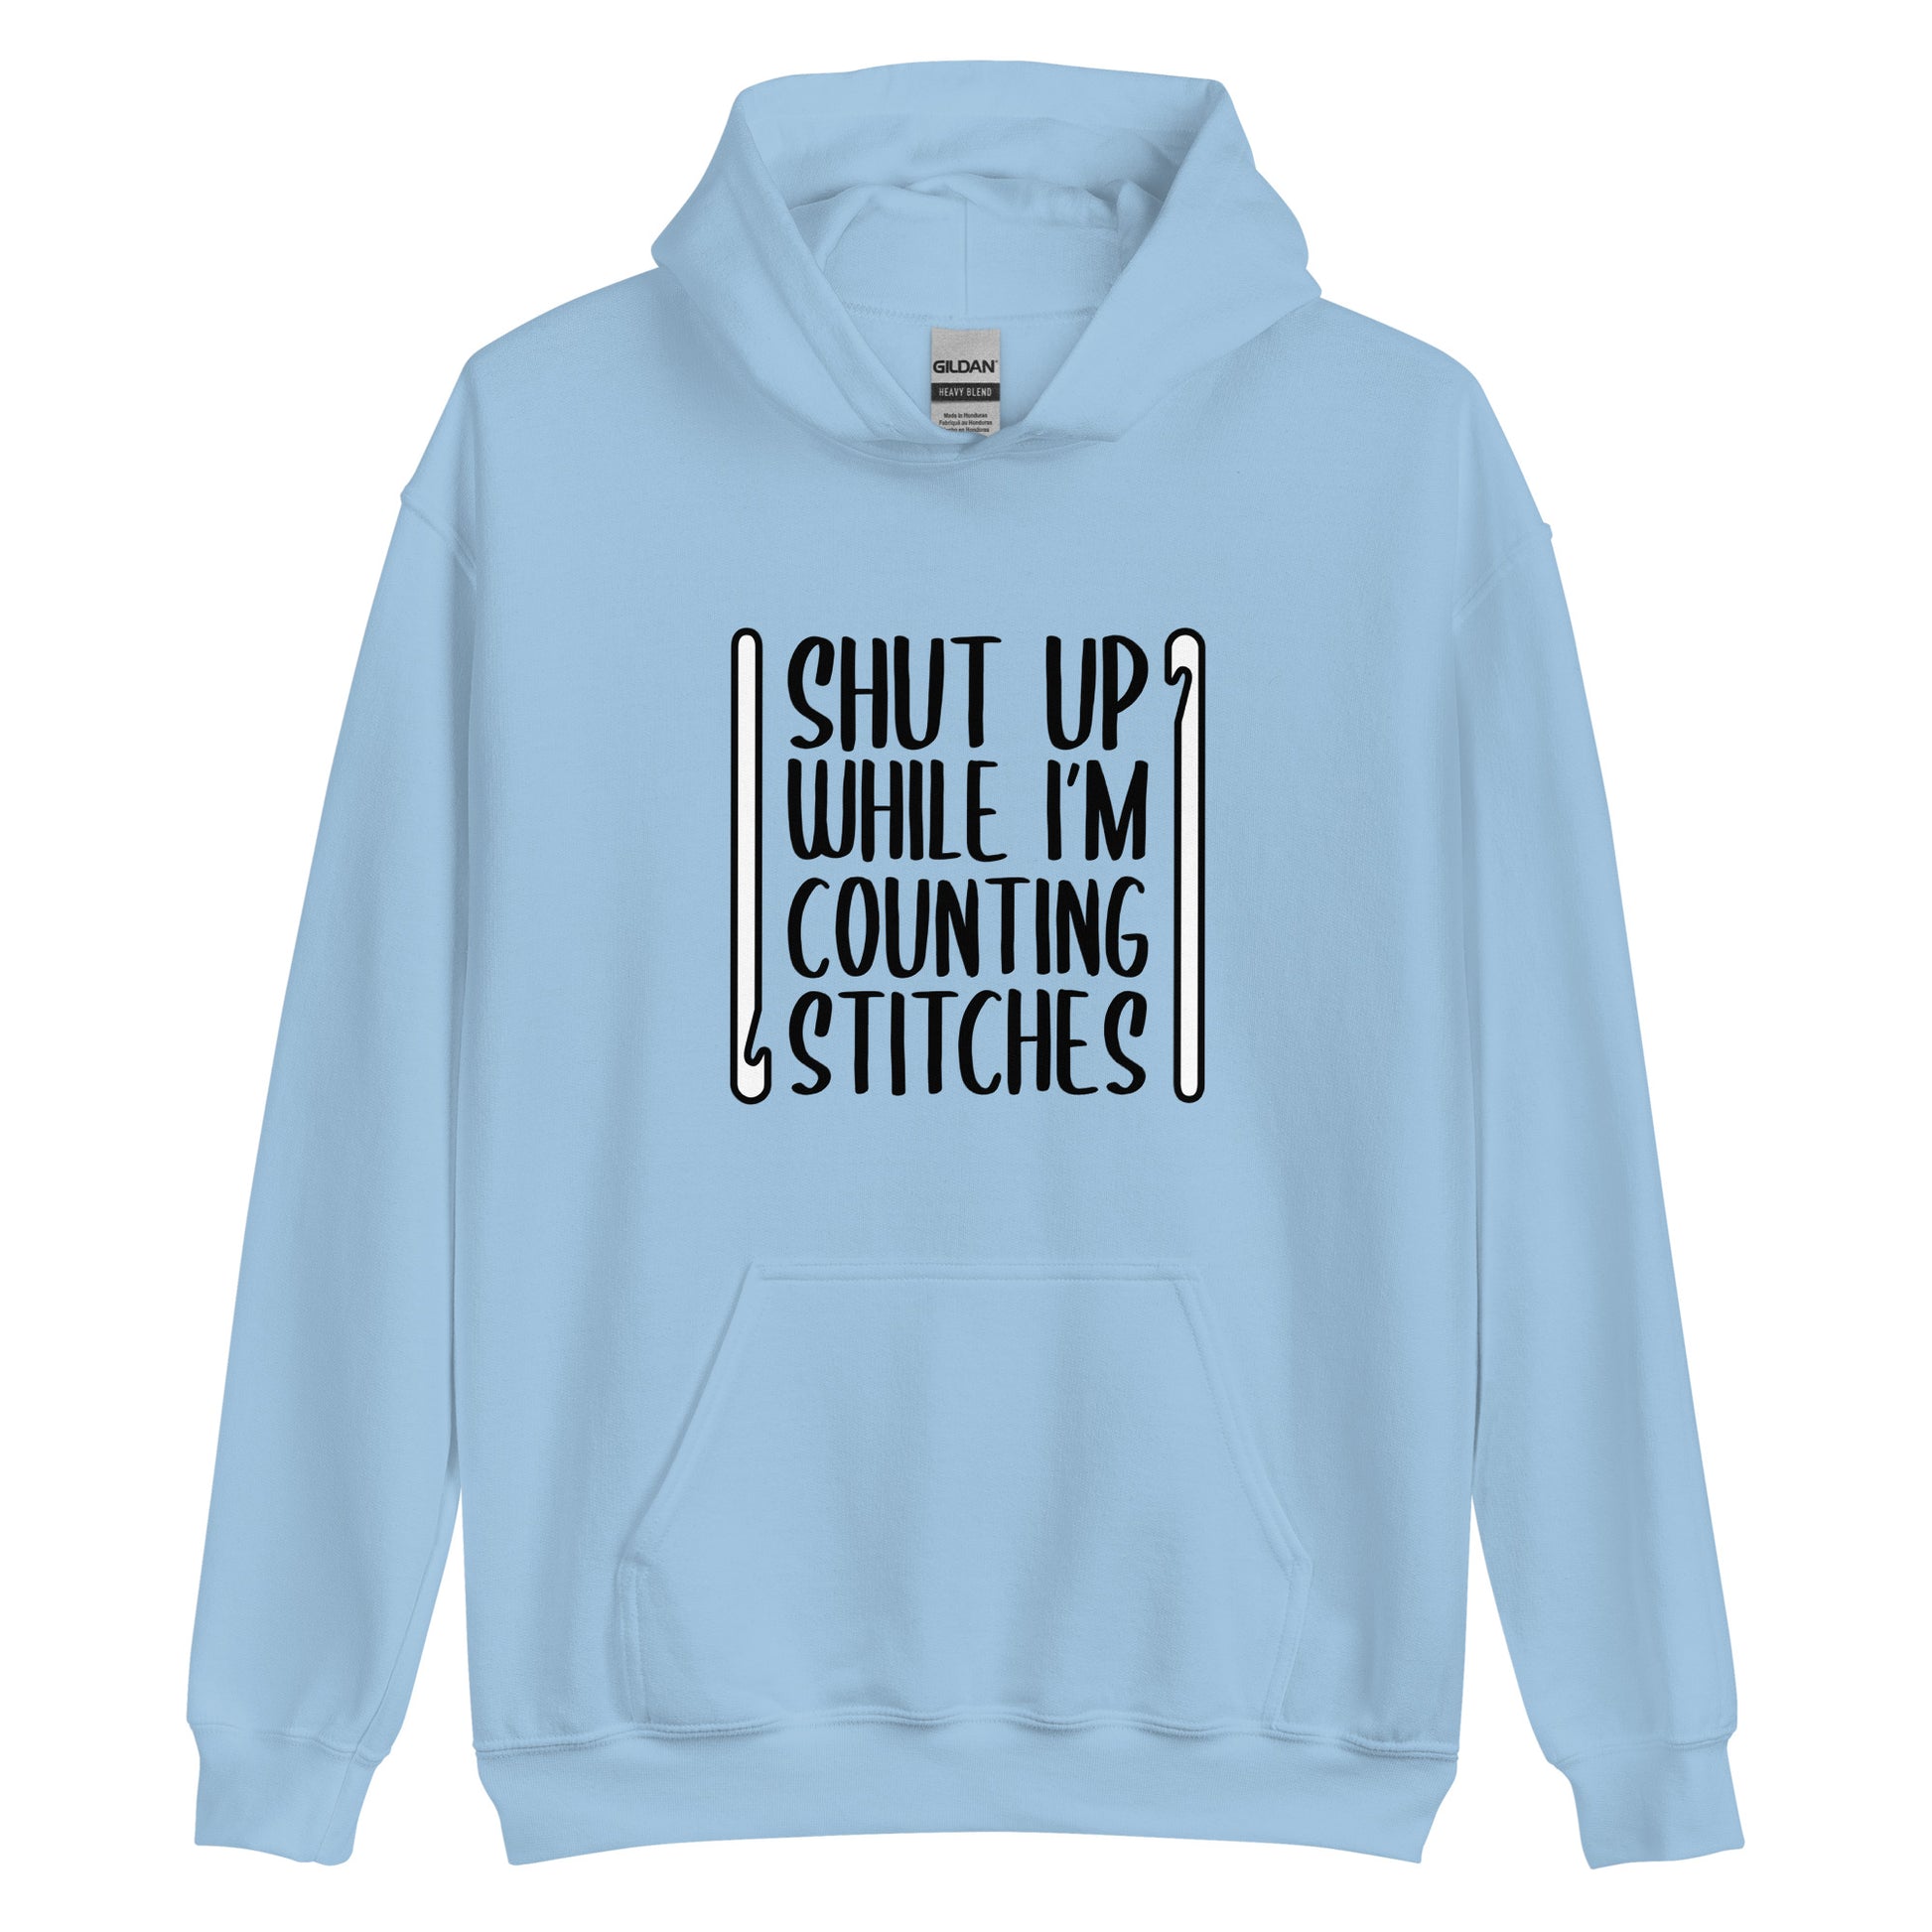 A light blue hooded sweatshirt featuring black text that reads "Shut up while I'm counting stitches." The text is framed by a crochet hook to the left and right.